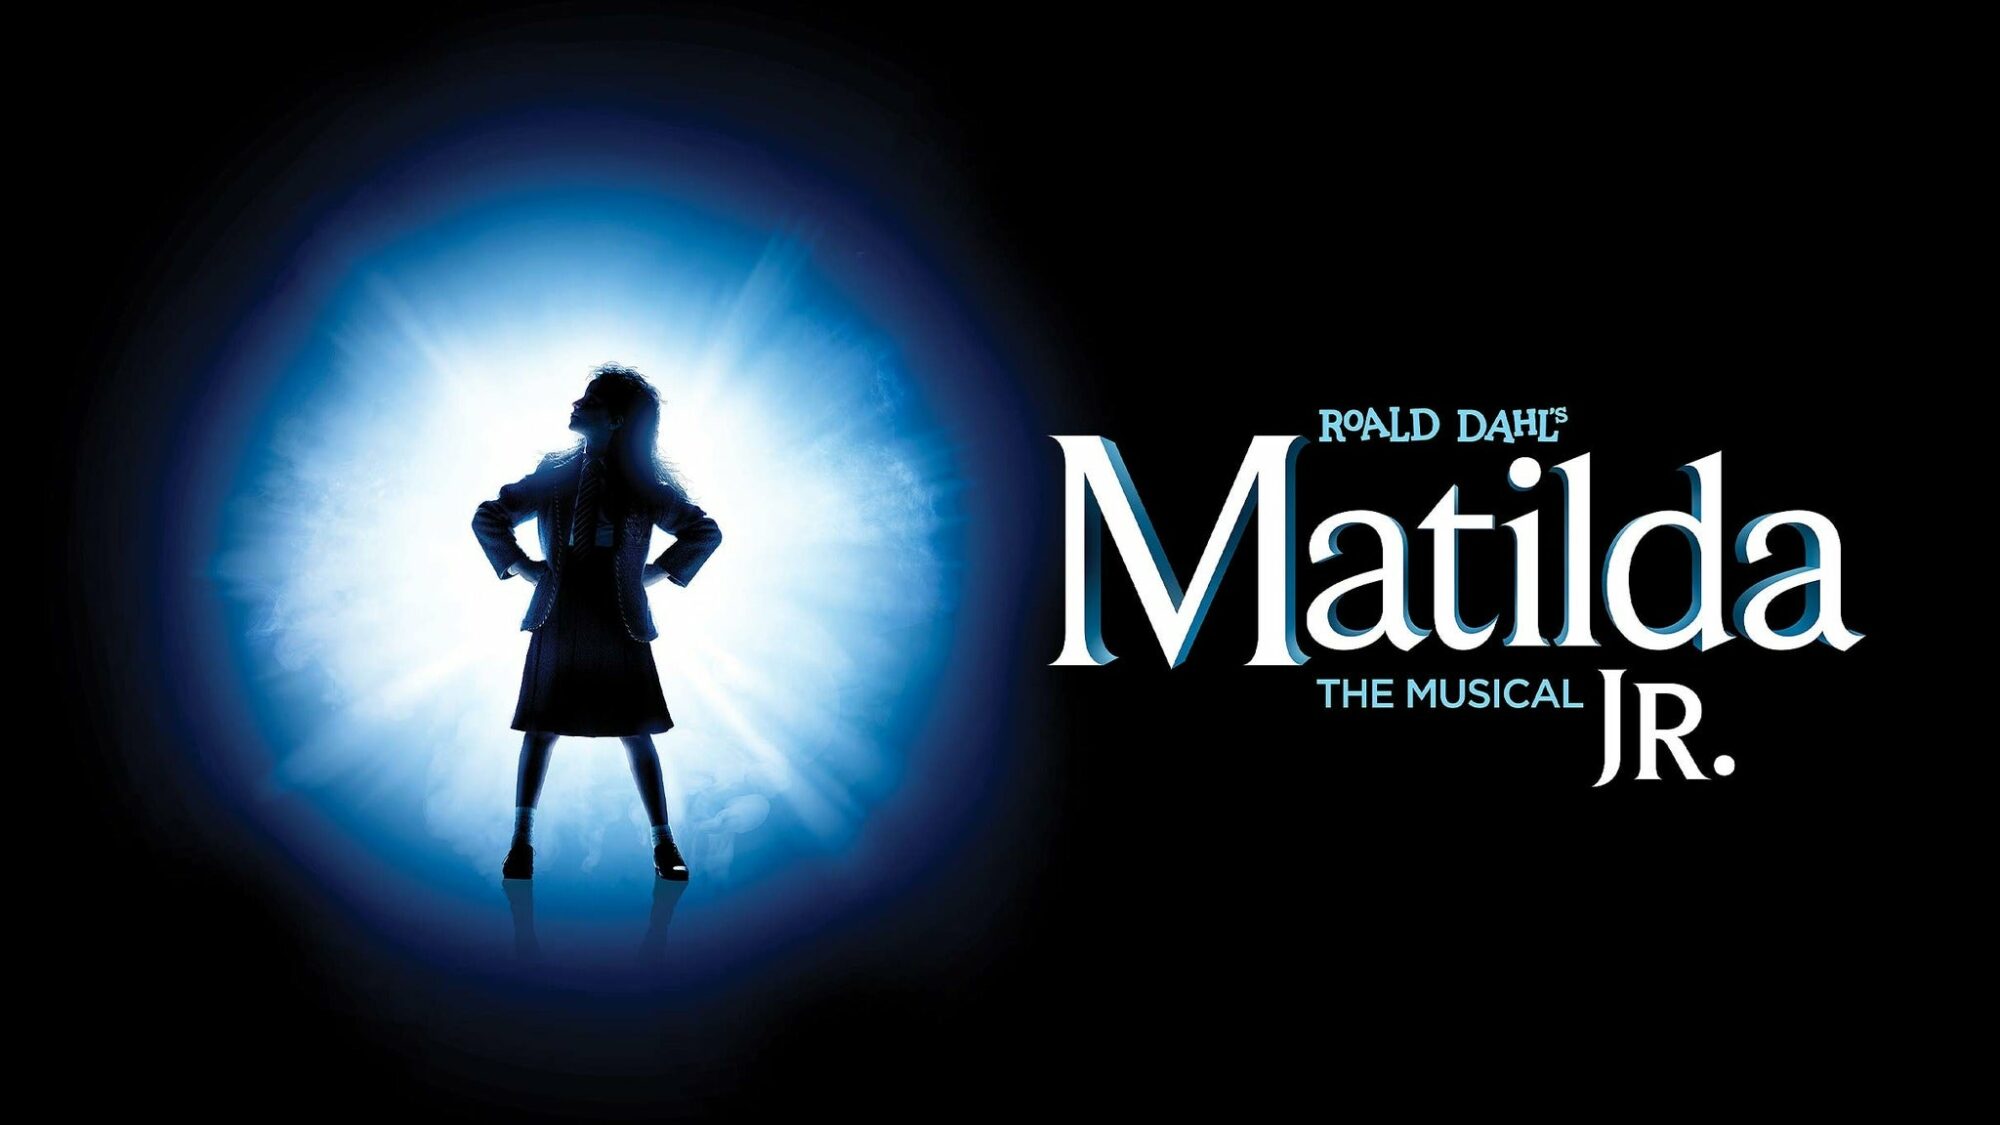 Image name Matilda Jr The Musical at Whitby Pavilion Theatre Whitby the 32 image from the post Matilda Jr: The Musical at Whitby Pavilion Theatre, Whitby in Yorkshire.com.